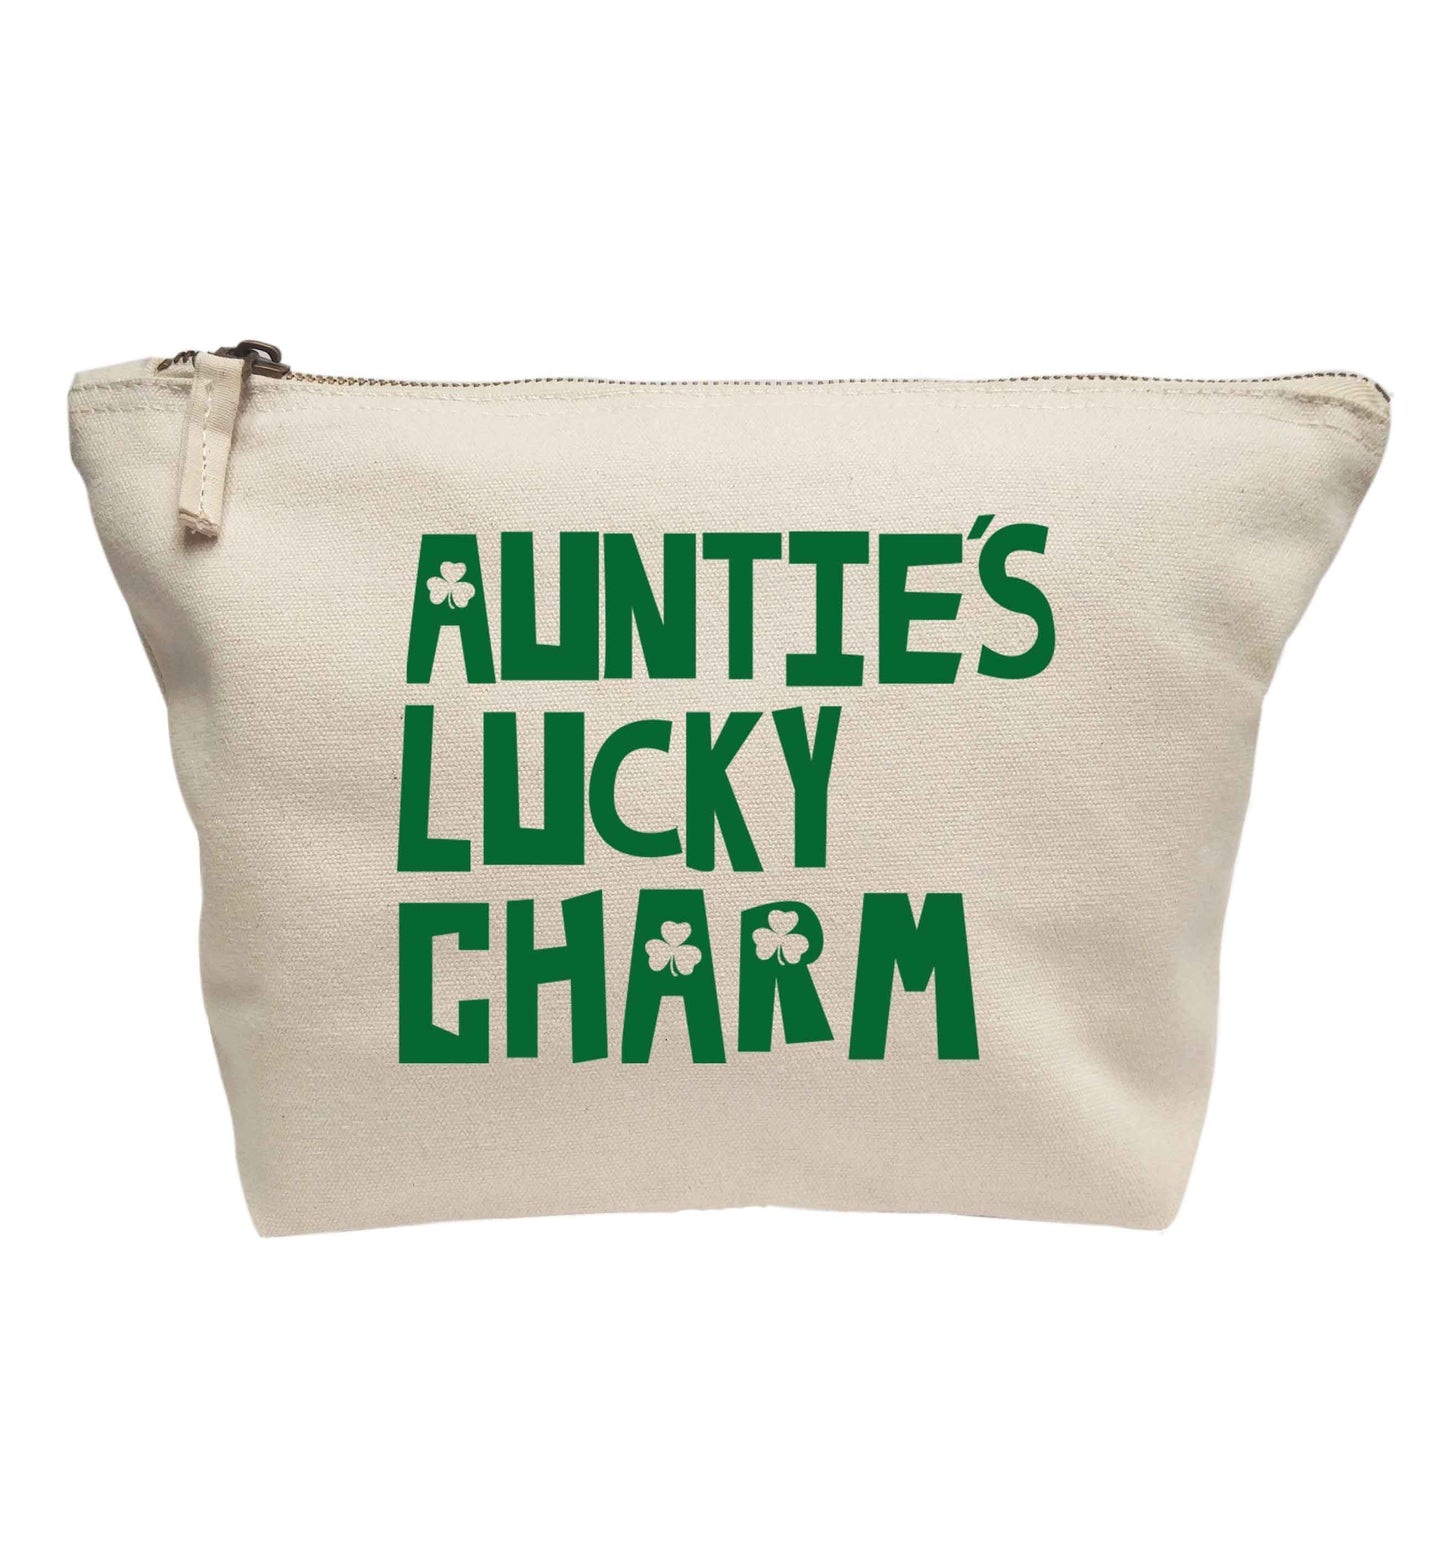 Auntie's lucky charm | Makeup / wash bag